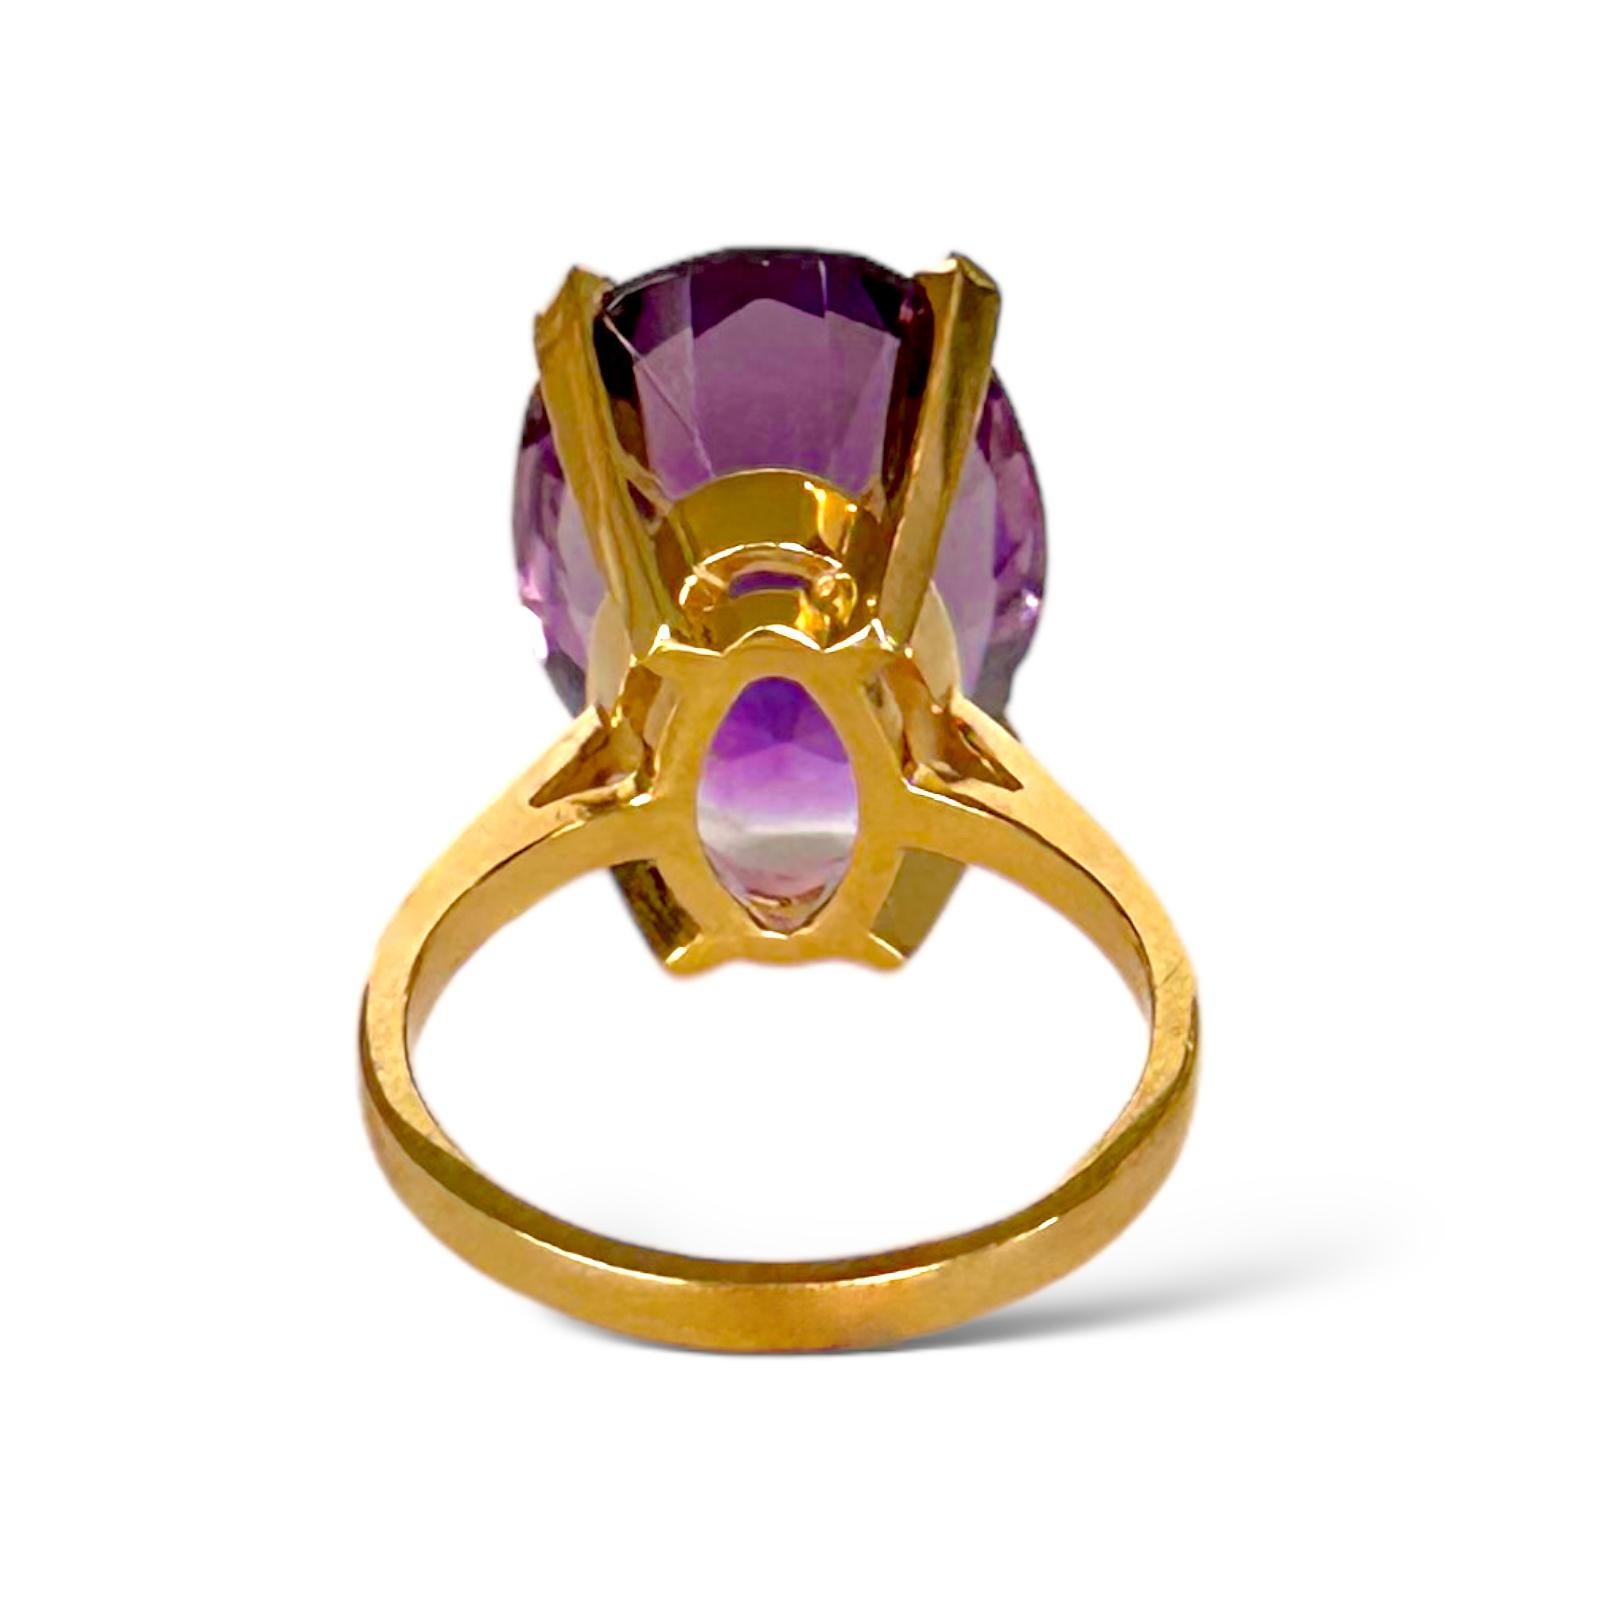 5.0 Carat Amethyst 14K Gold Vintage Cocktail Ring In Excellent Condition For Sale In West Palm Beach, FL